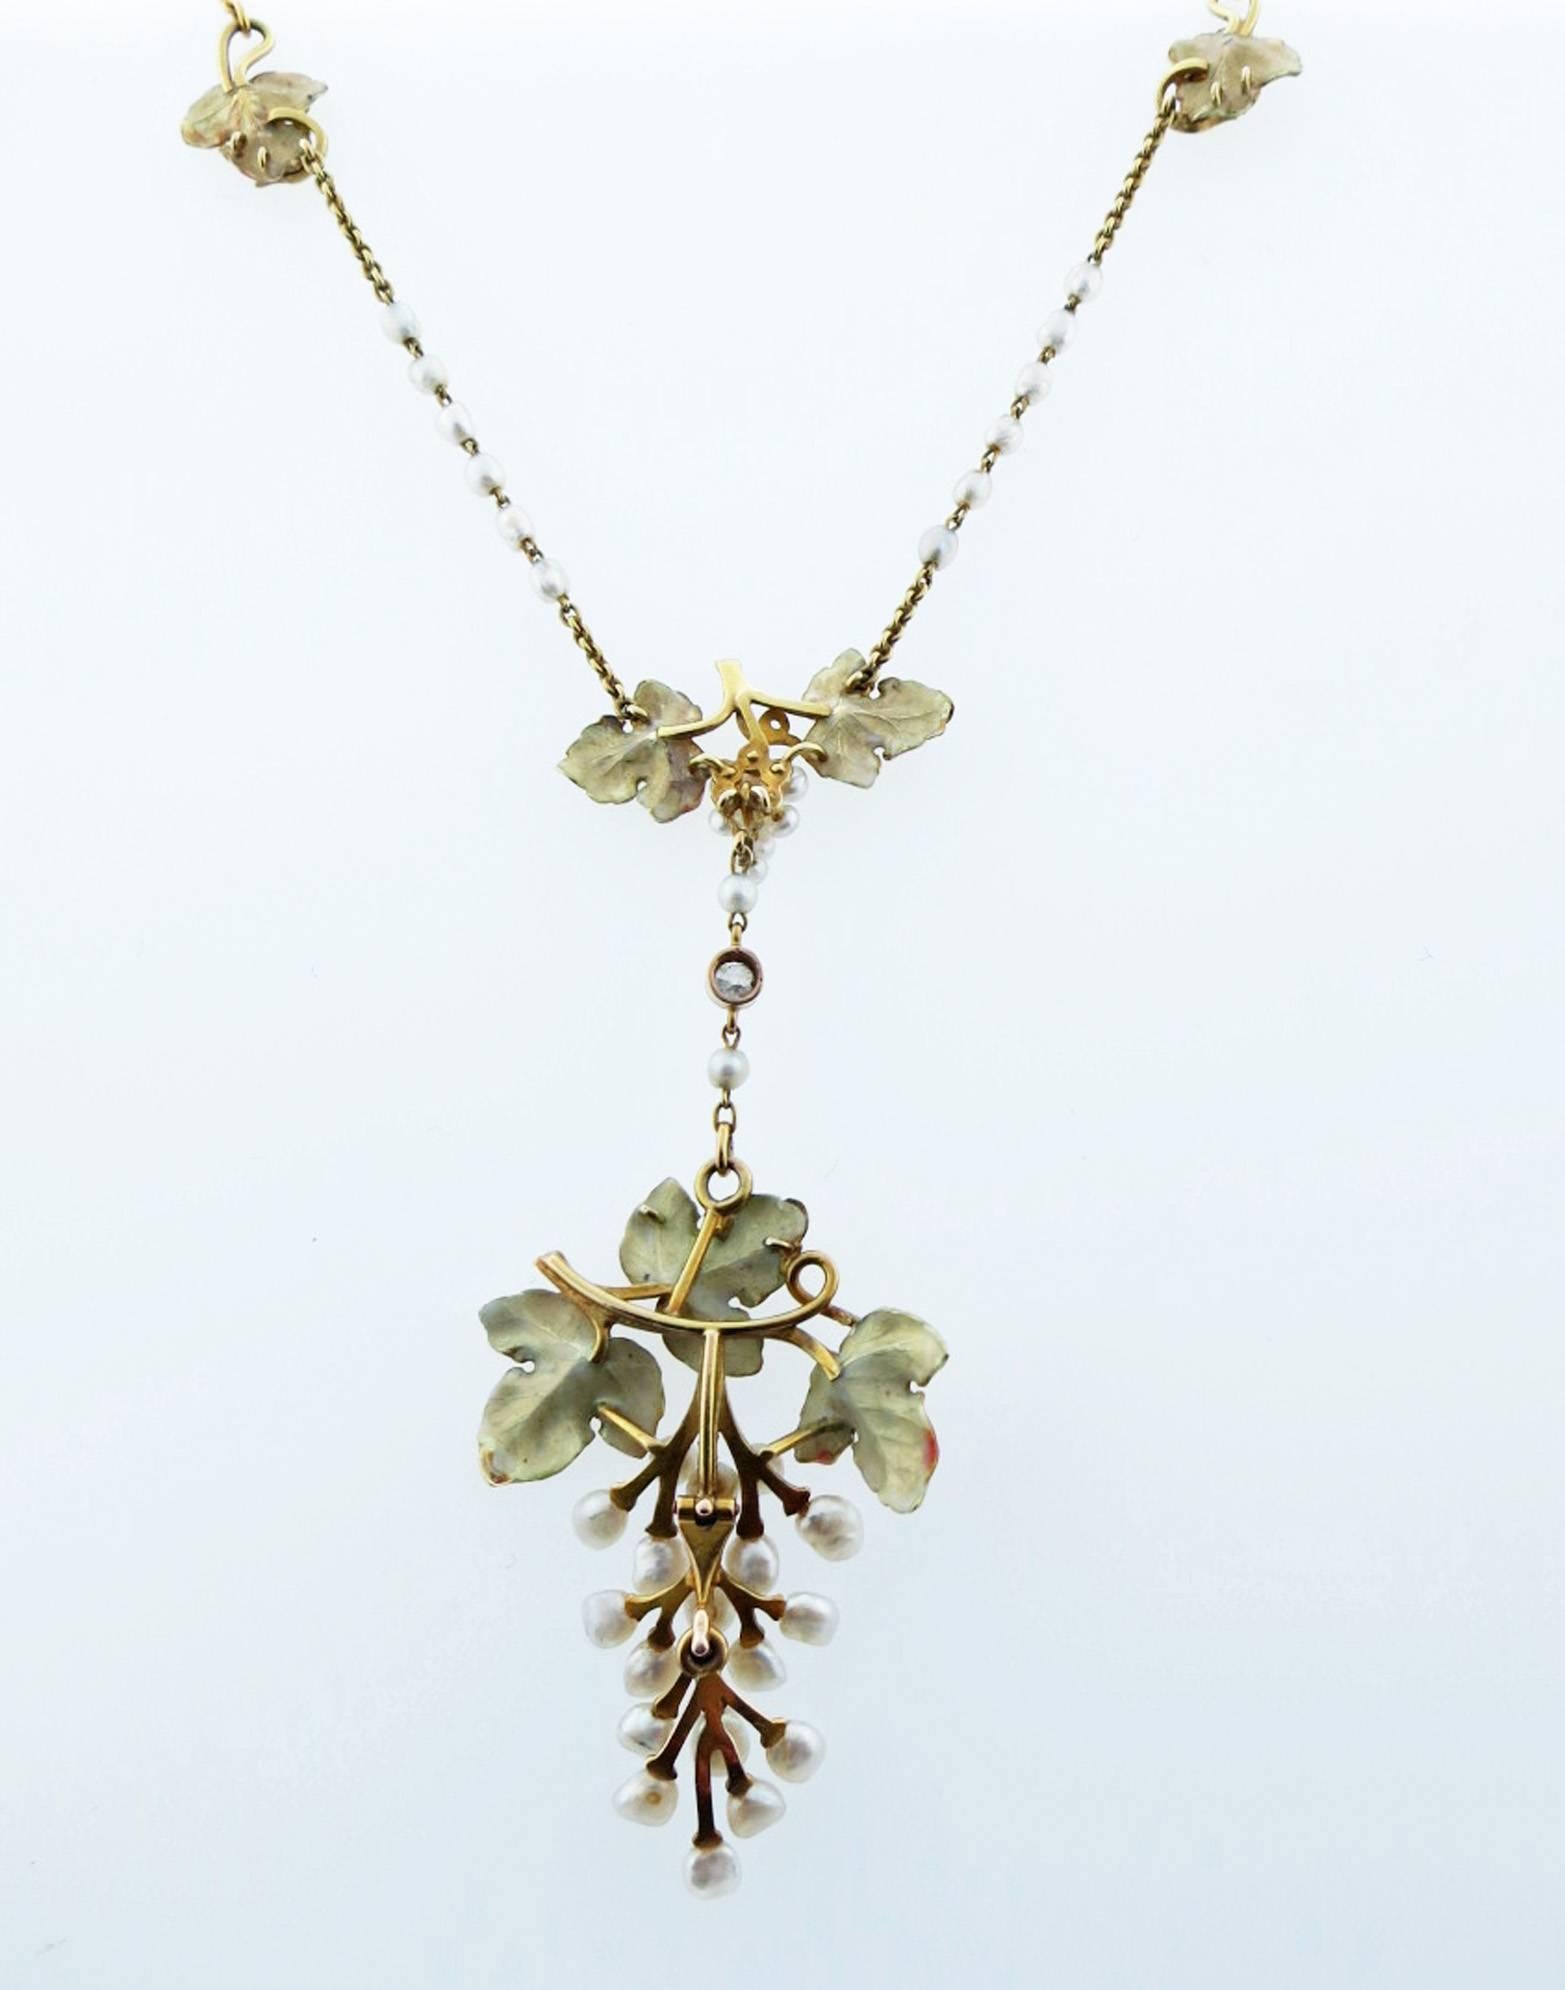 Pretty  14kt. necklace in a grape vine design. Circa 1910 in tones of pink and green enamel. The pearls are all natural with a round European cut diamond accent.The necklace measures to bottom of grape cluster to approx 20 inches on the neck. 